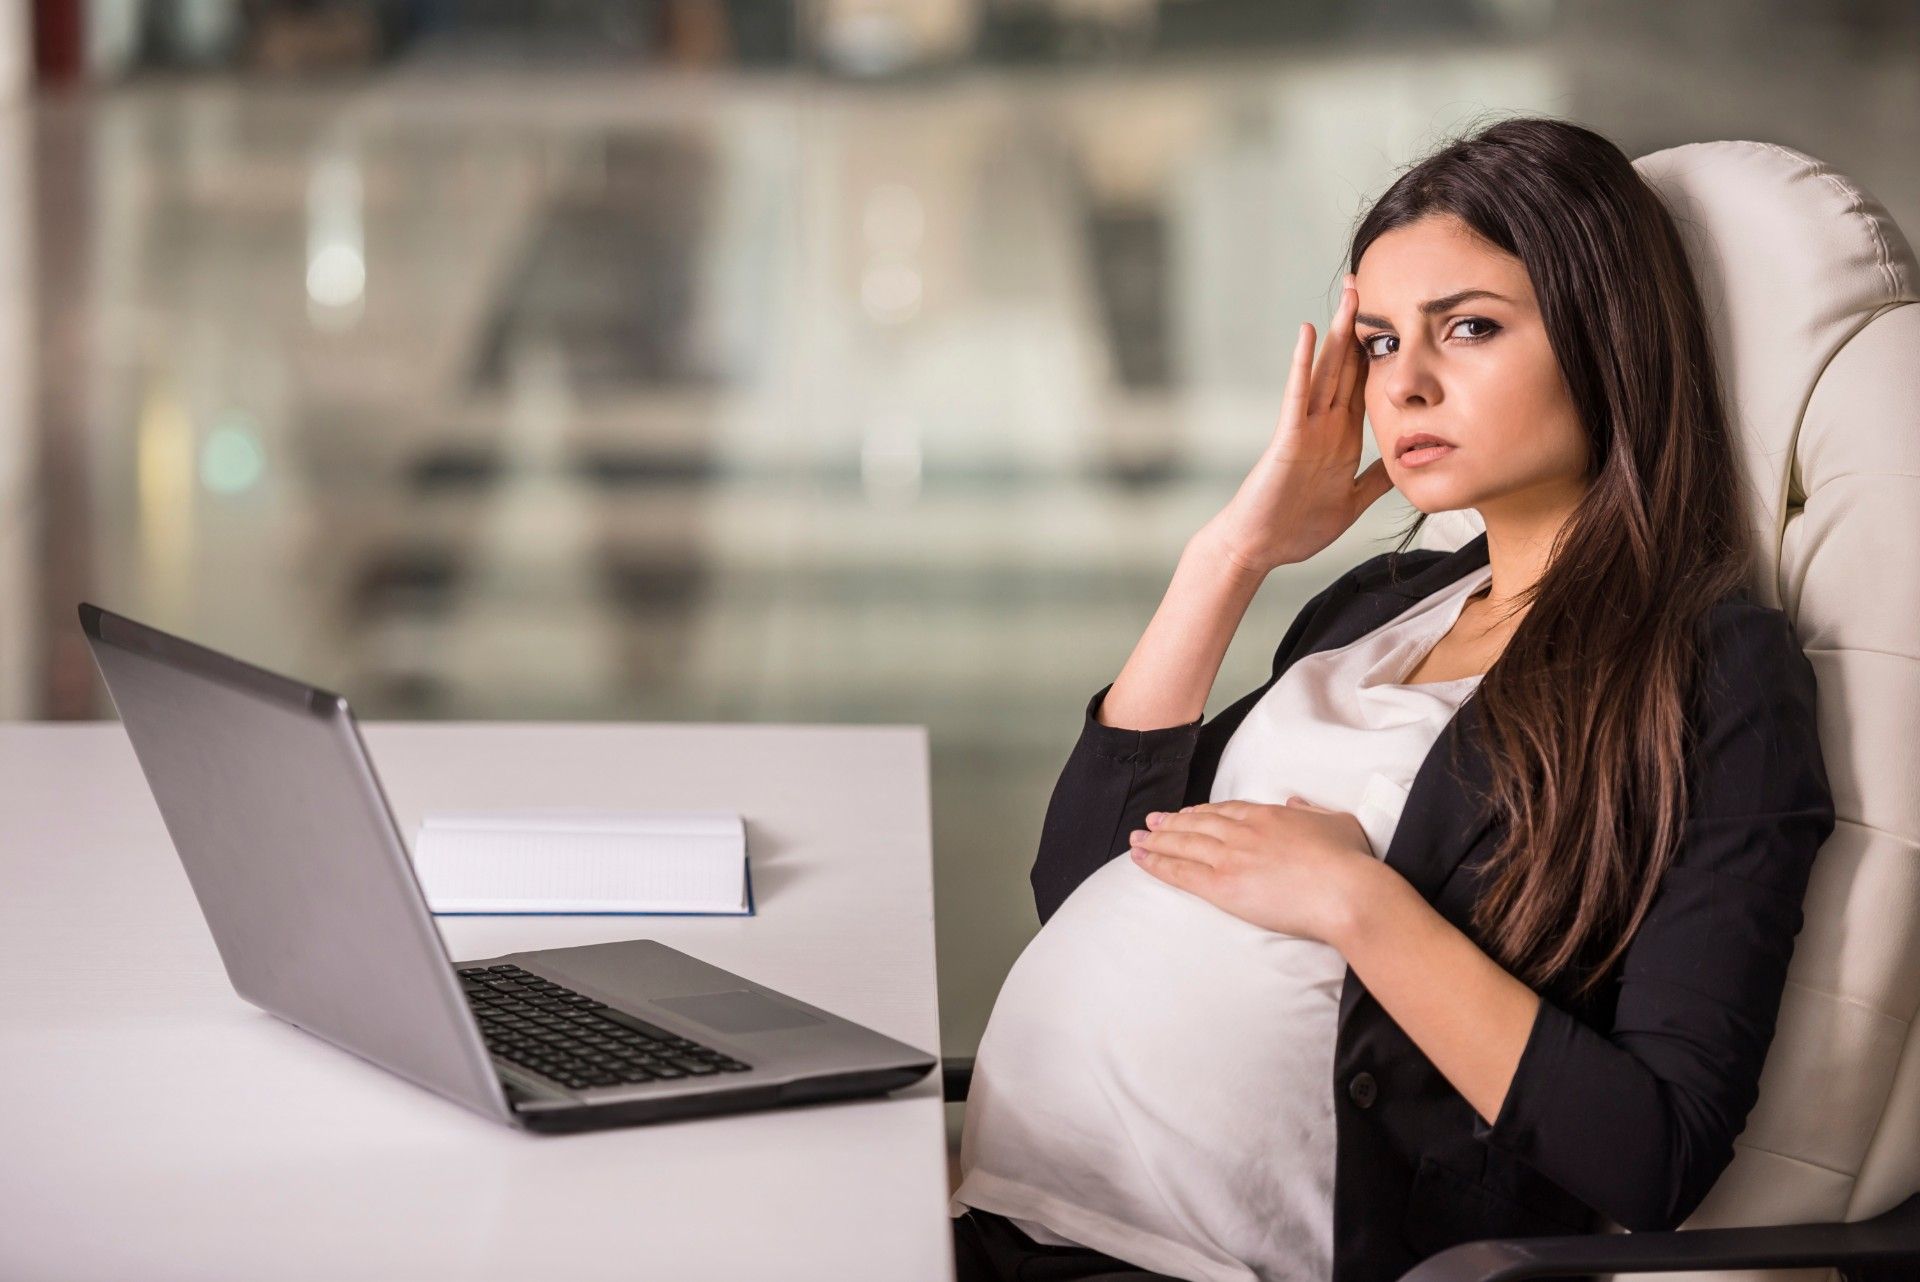 An annoyed pregnant woman sits at a table with a laptop in an office - pregnant worker rights